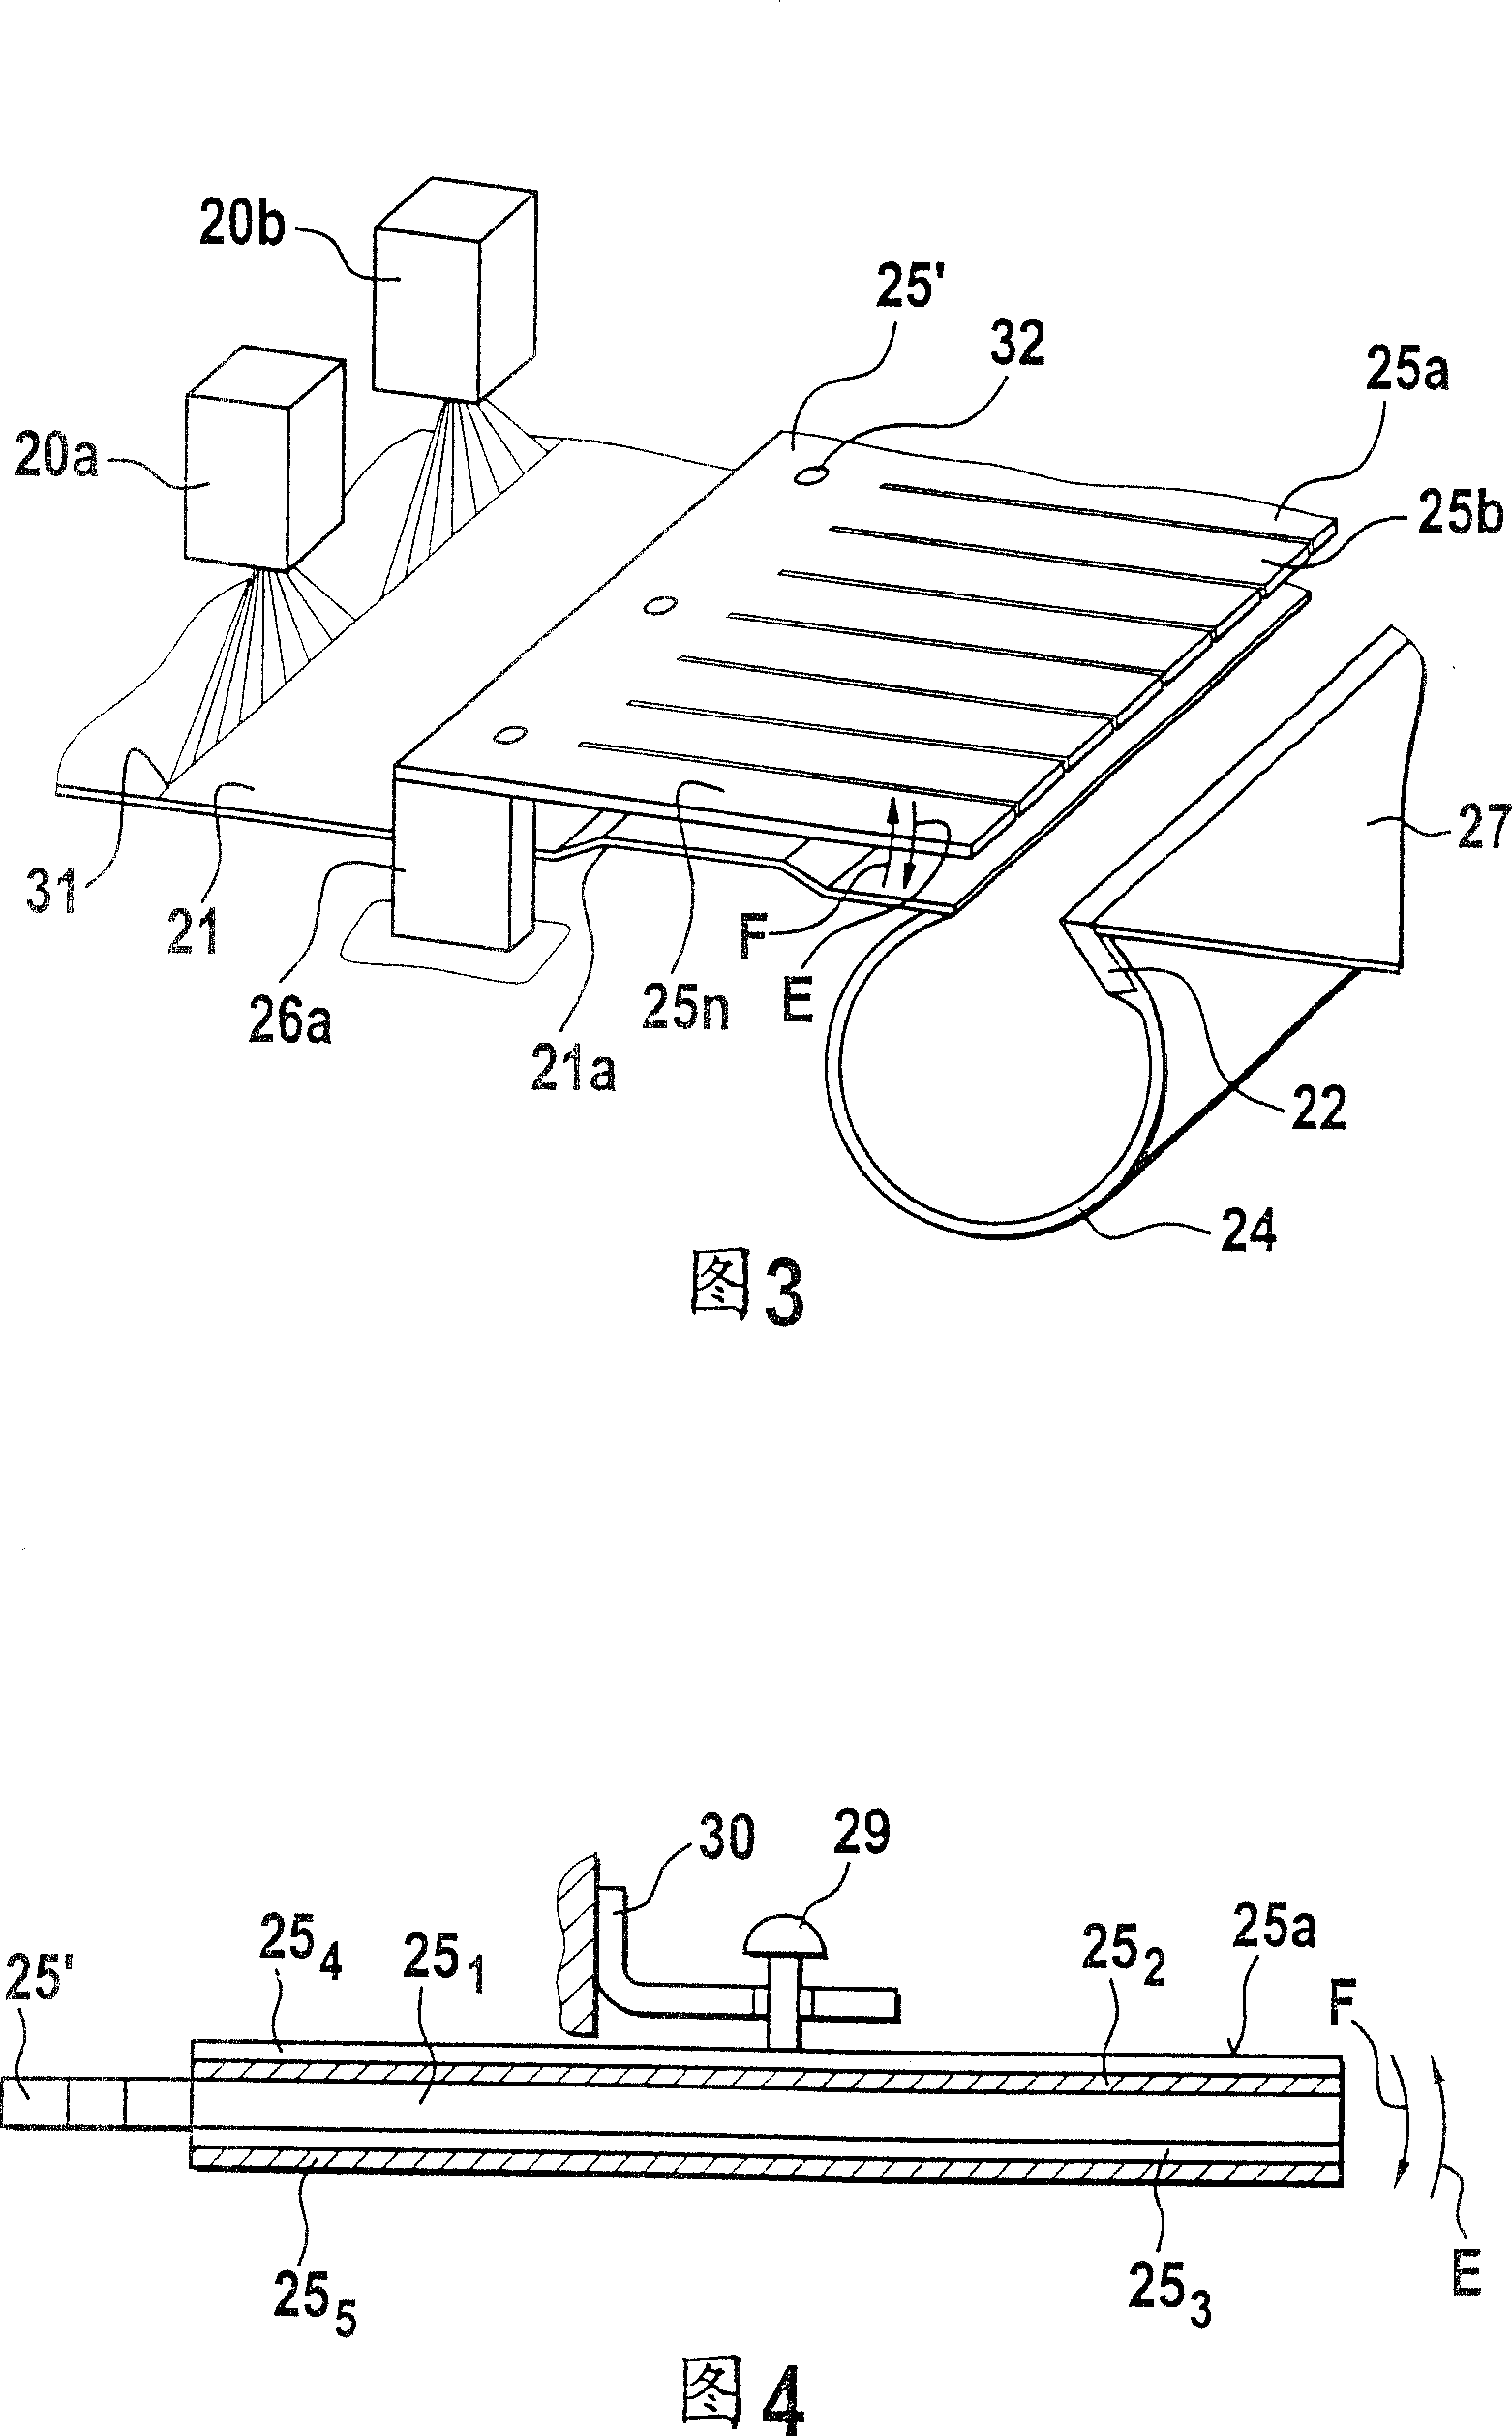 Device for cleaning and opening textile material, especially cotton at clearer, carding machine